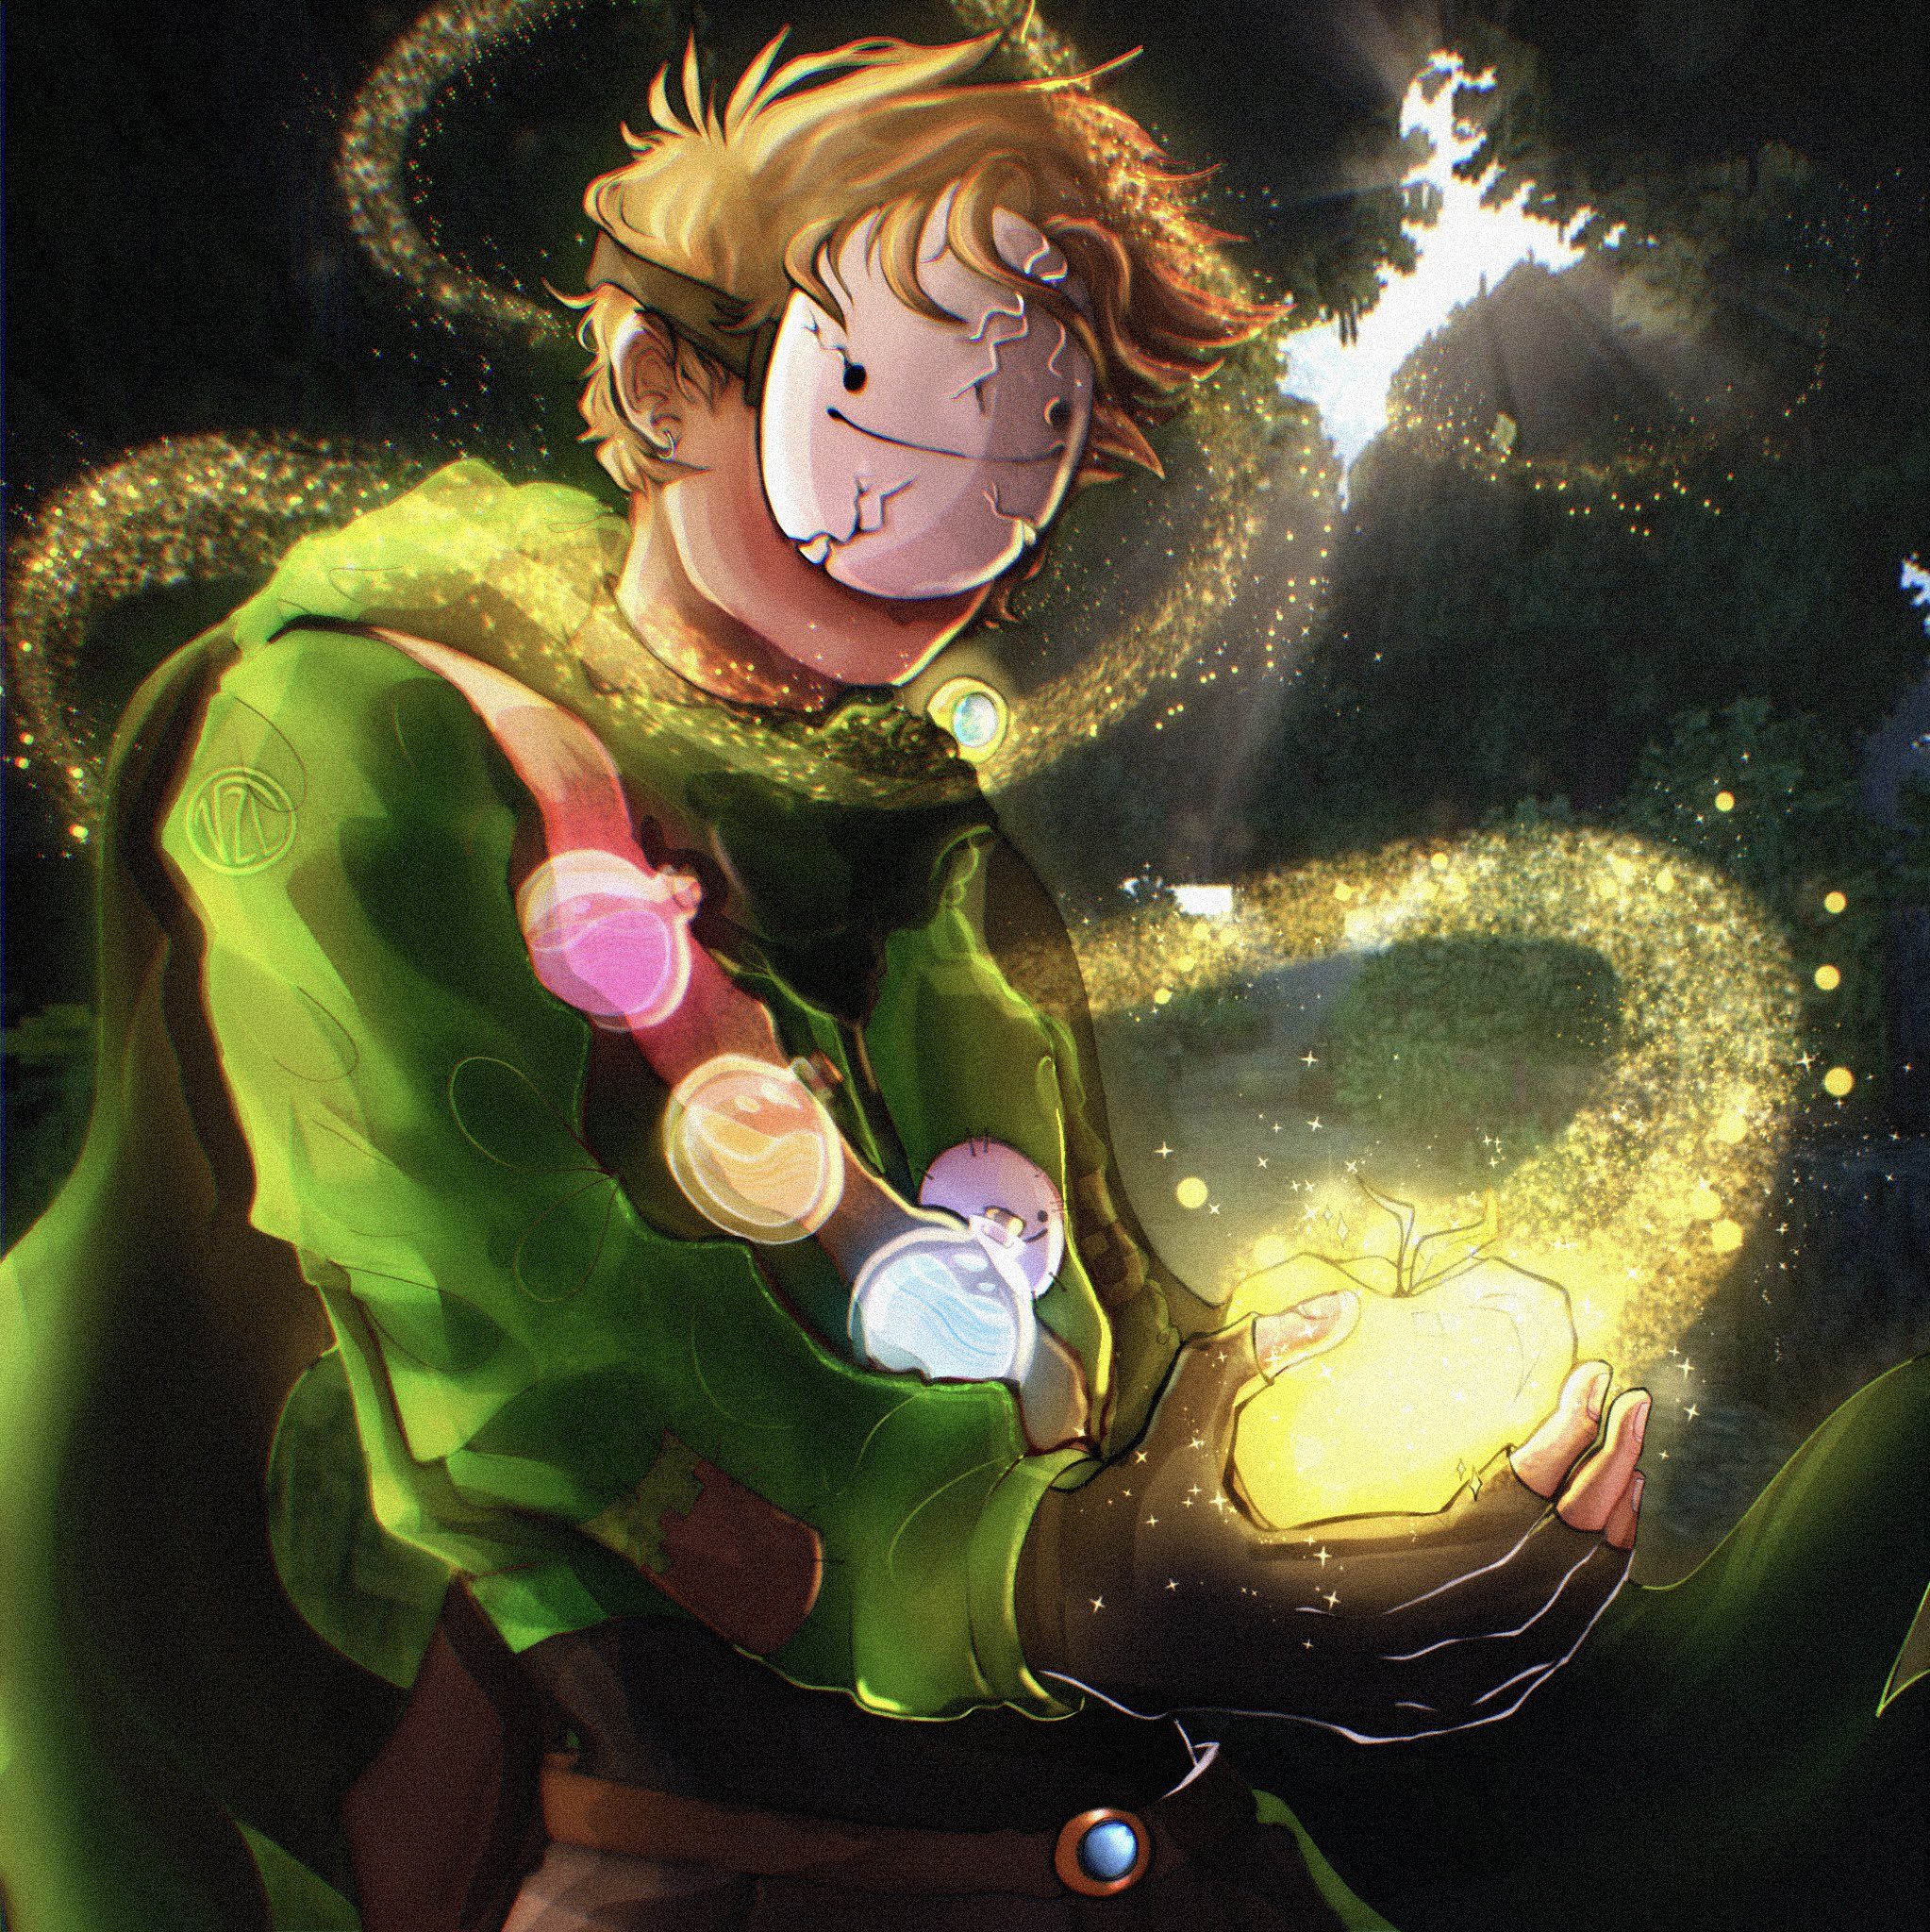 a drawing of Dream as a human holding various potion bottles. Dream's smiling white mask covers his whole face. He has ruffled blond hair. He looks down at his hand holding a golden apple. Glittery gold particles from the apple swirl around him and up into the trees above. He's wearing a rumpled green baggy shirt with a potion holder slung across his right shoulder to left hip. Pink, orange, and blue potions are in the potion holder's straps. The drawing cuts off right below Dream's navel, which has a belt with a glowing blue gem holding up hisb tan pants.